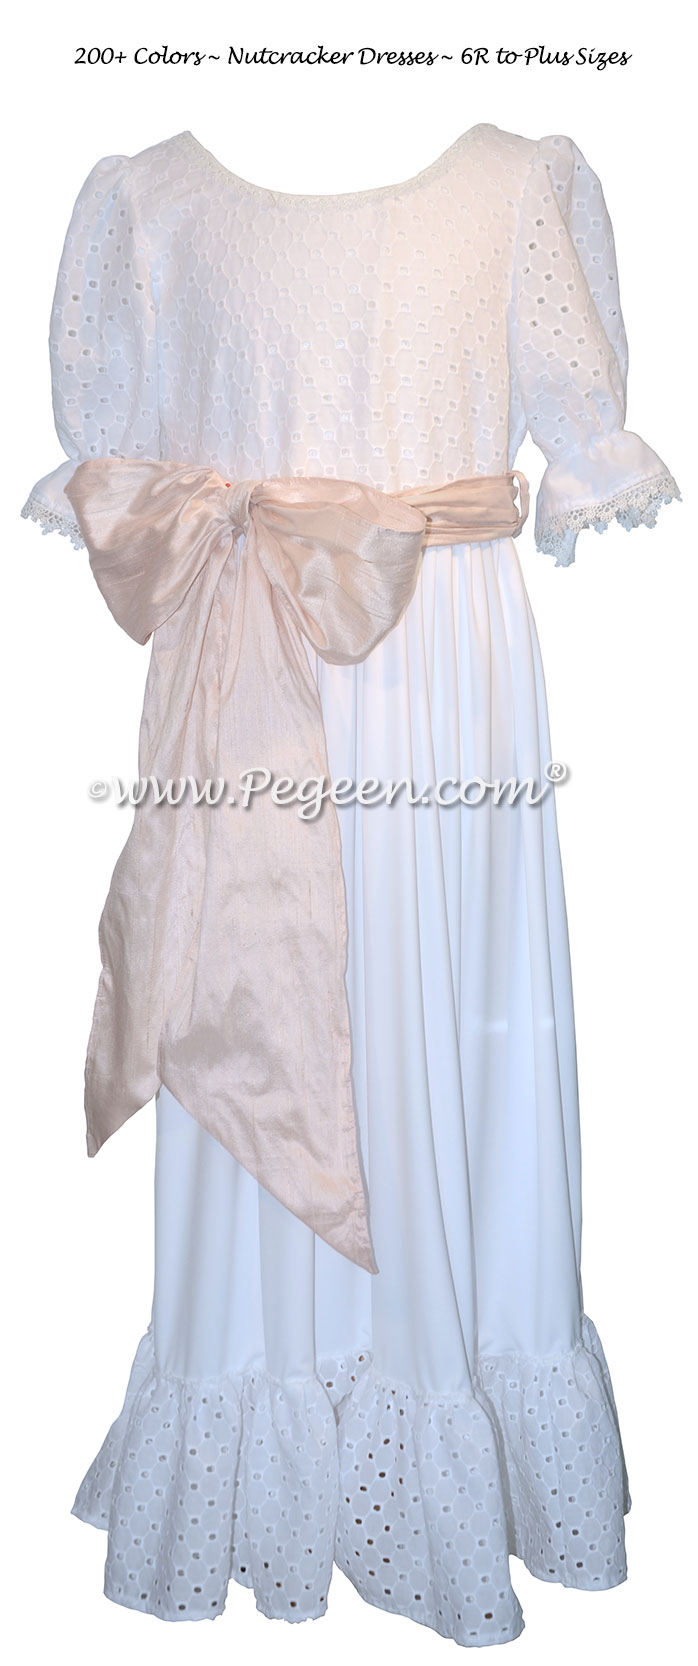 White Cotton Embroidery Nightgown for The Nutcracker